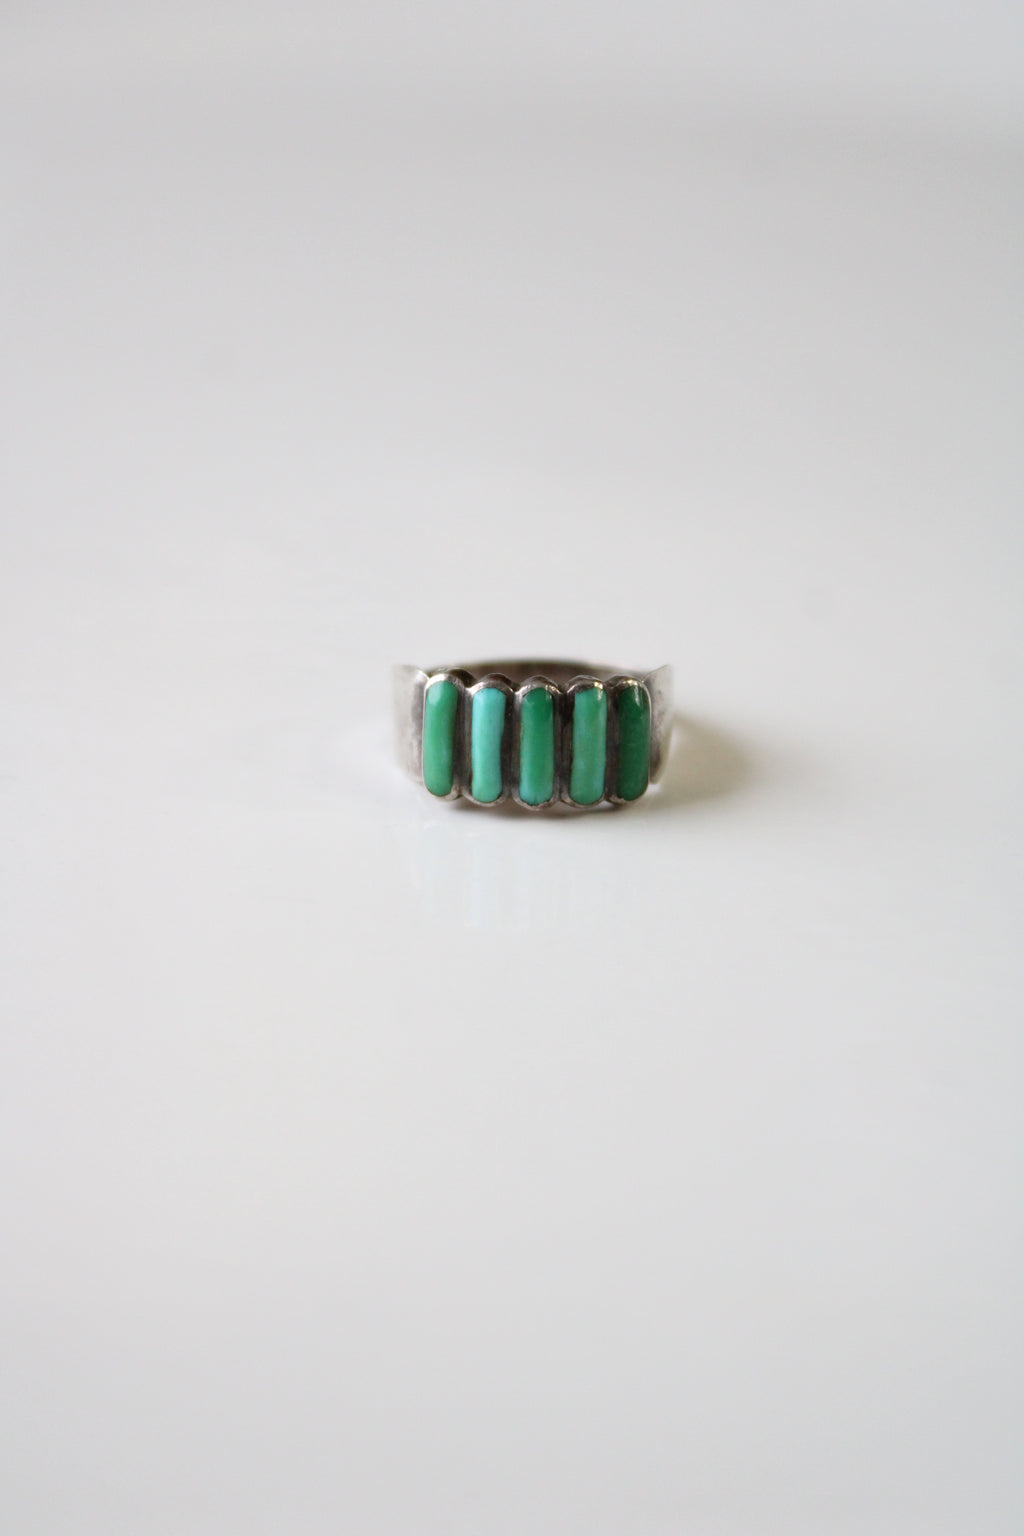 Blue Green Turquoise Sterling Silver Ring | Size 7